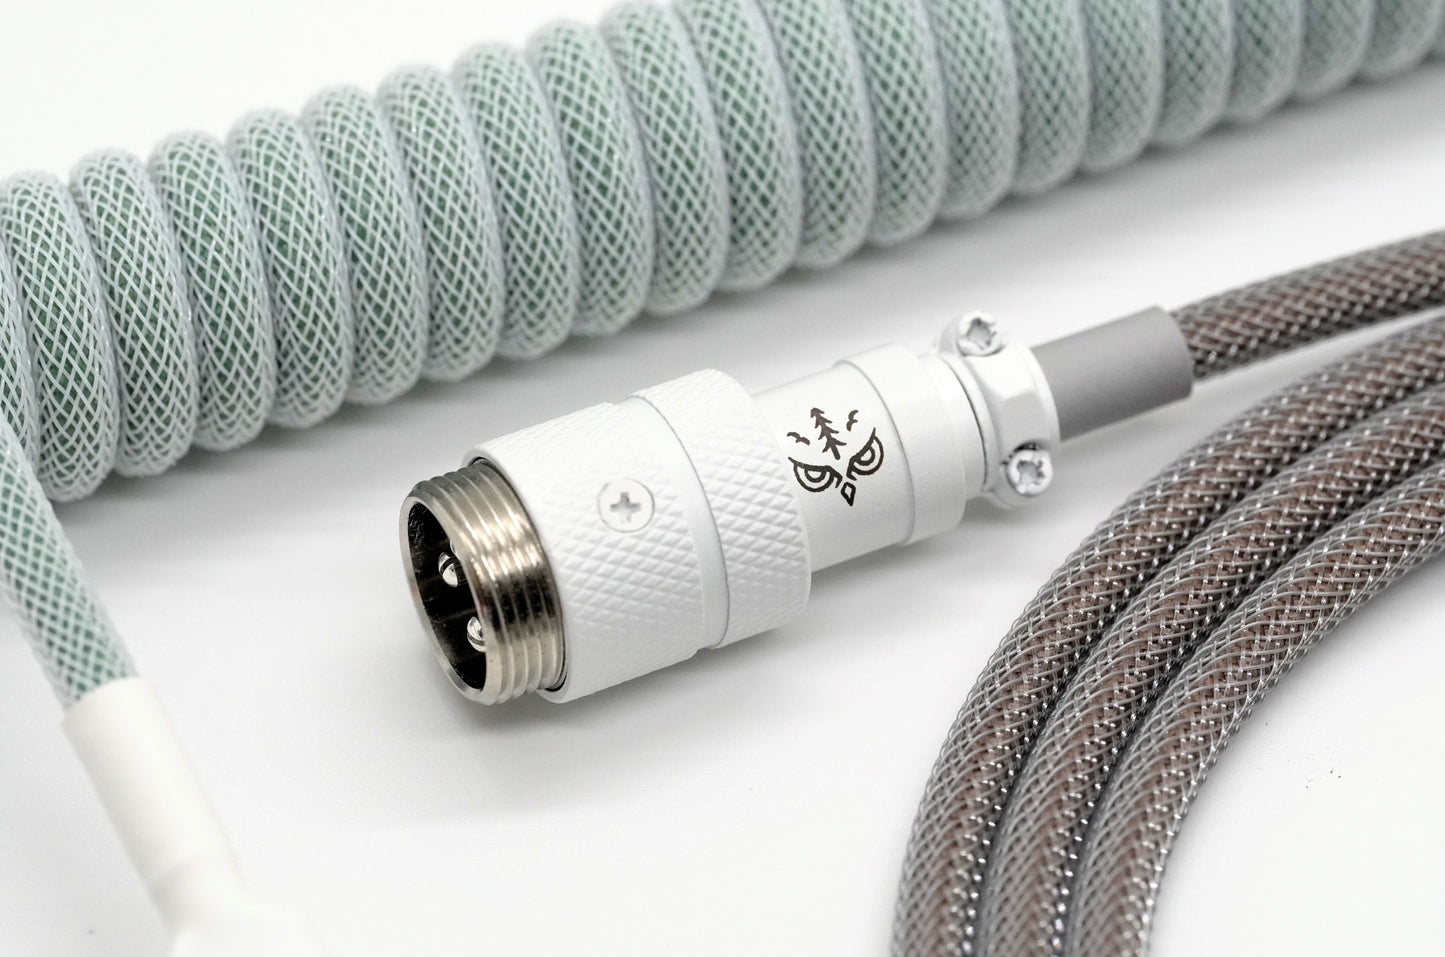 GMK November Fog Cable (Official Cable)